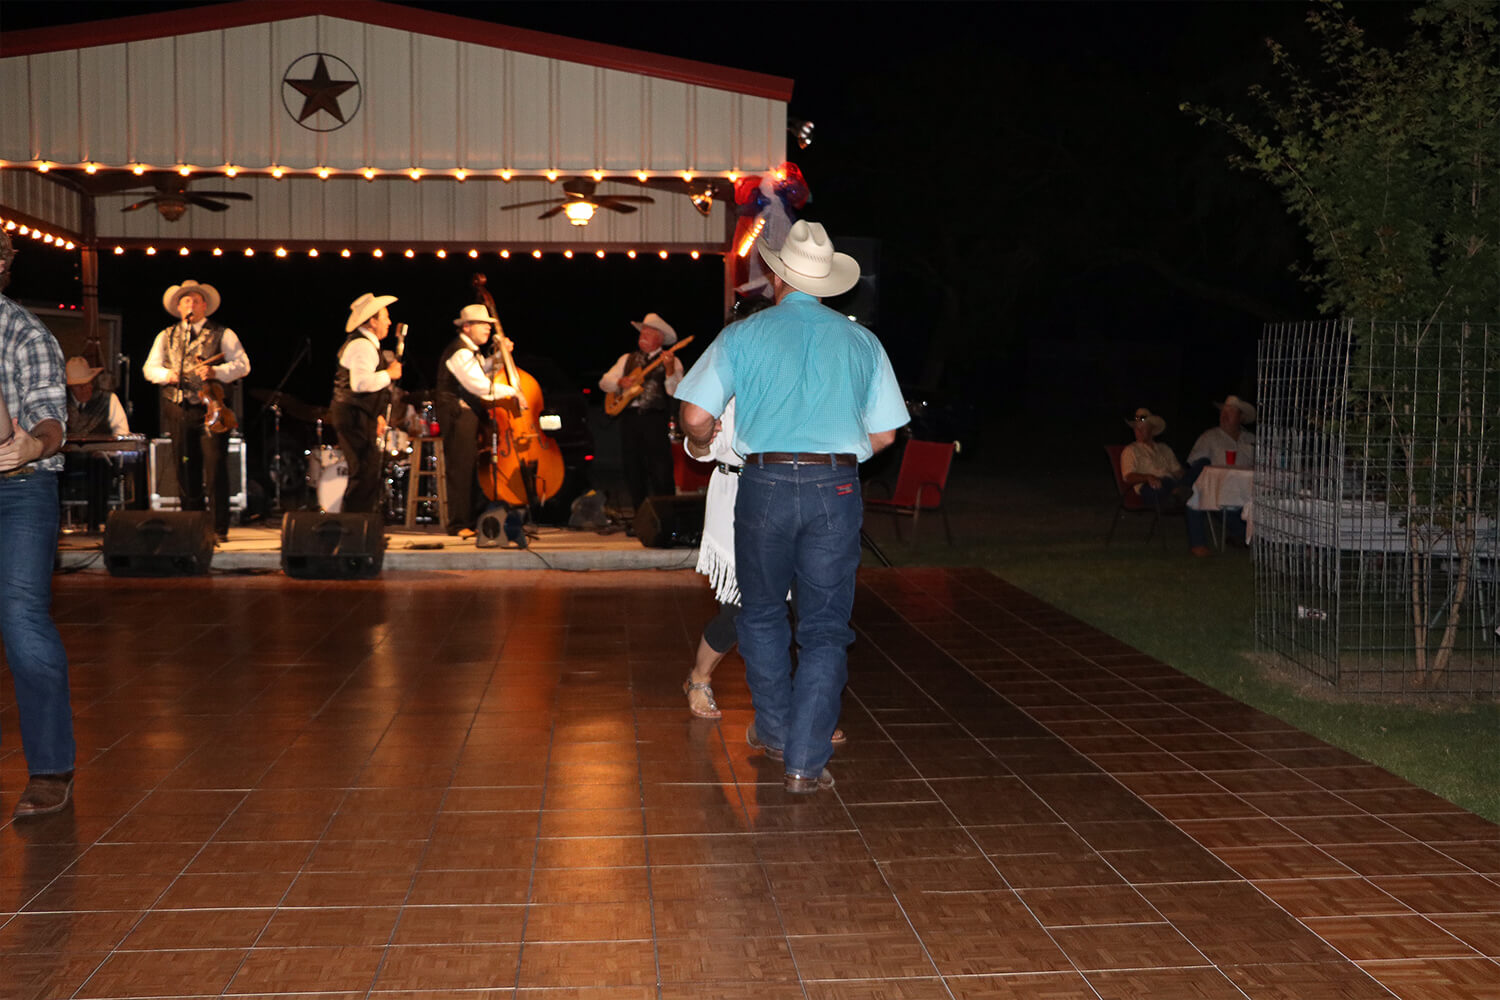 Teak dance floor with Oak border at this Western-themed dance event